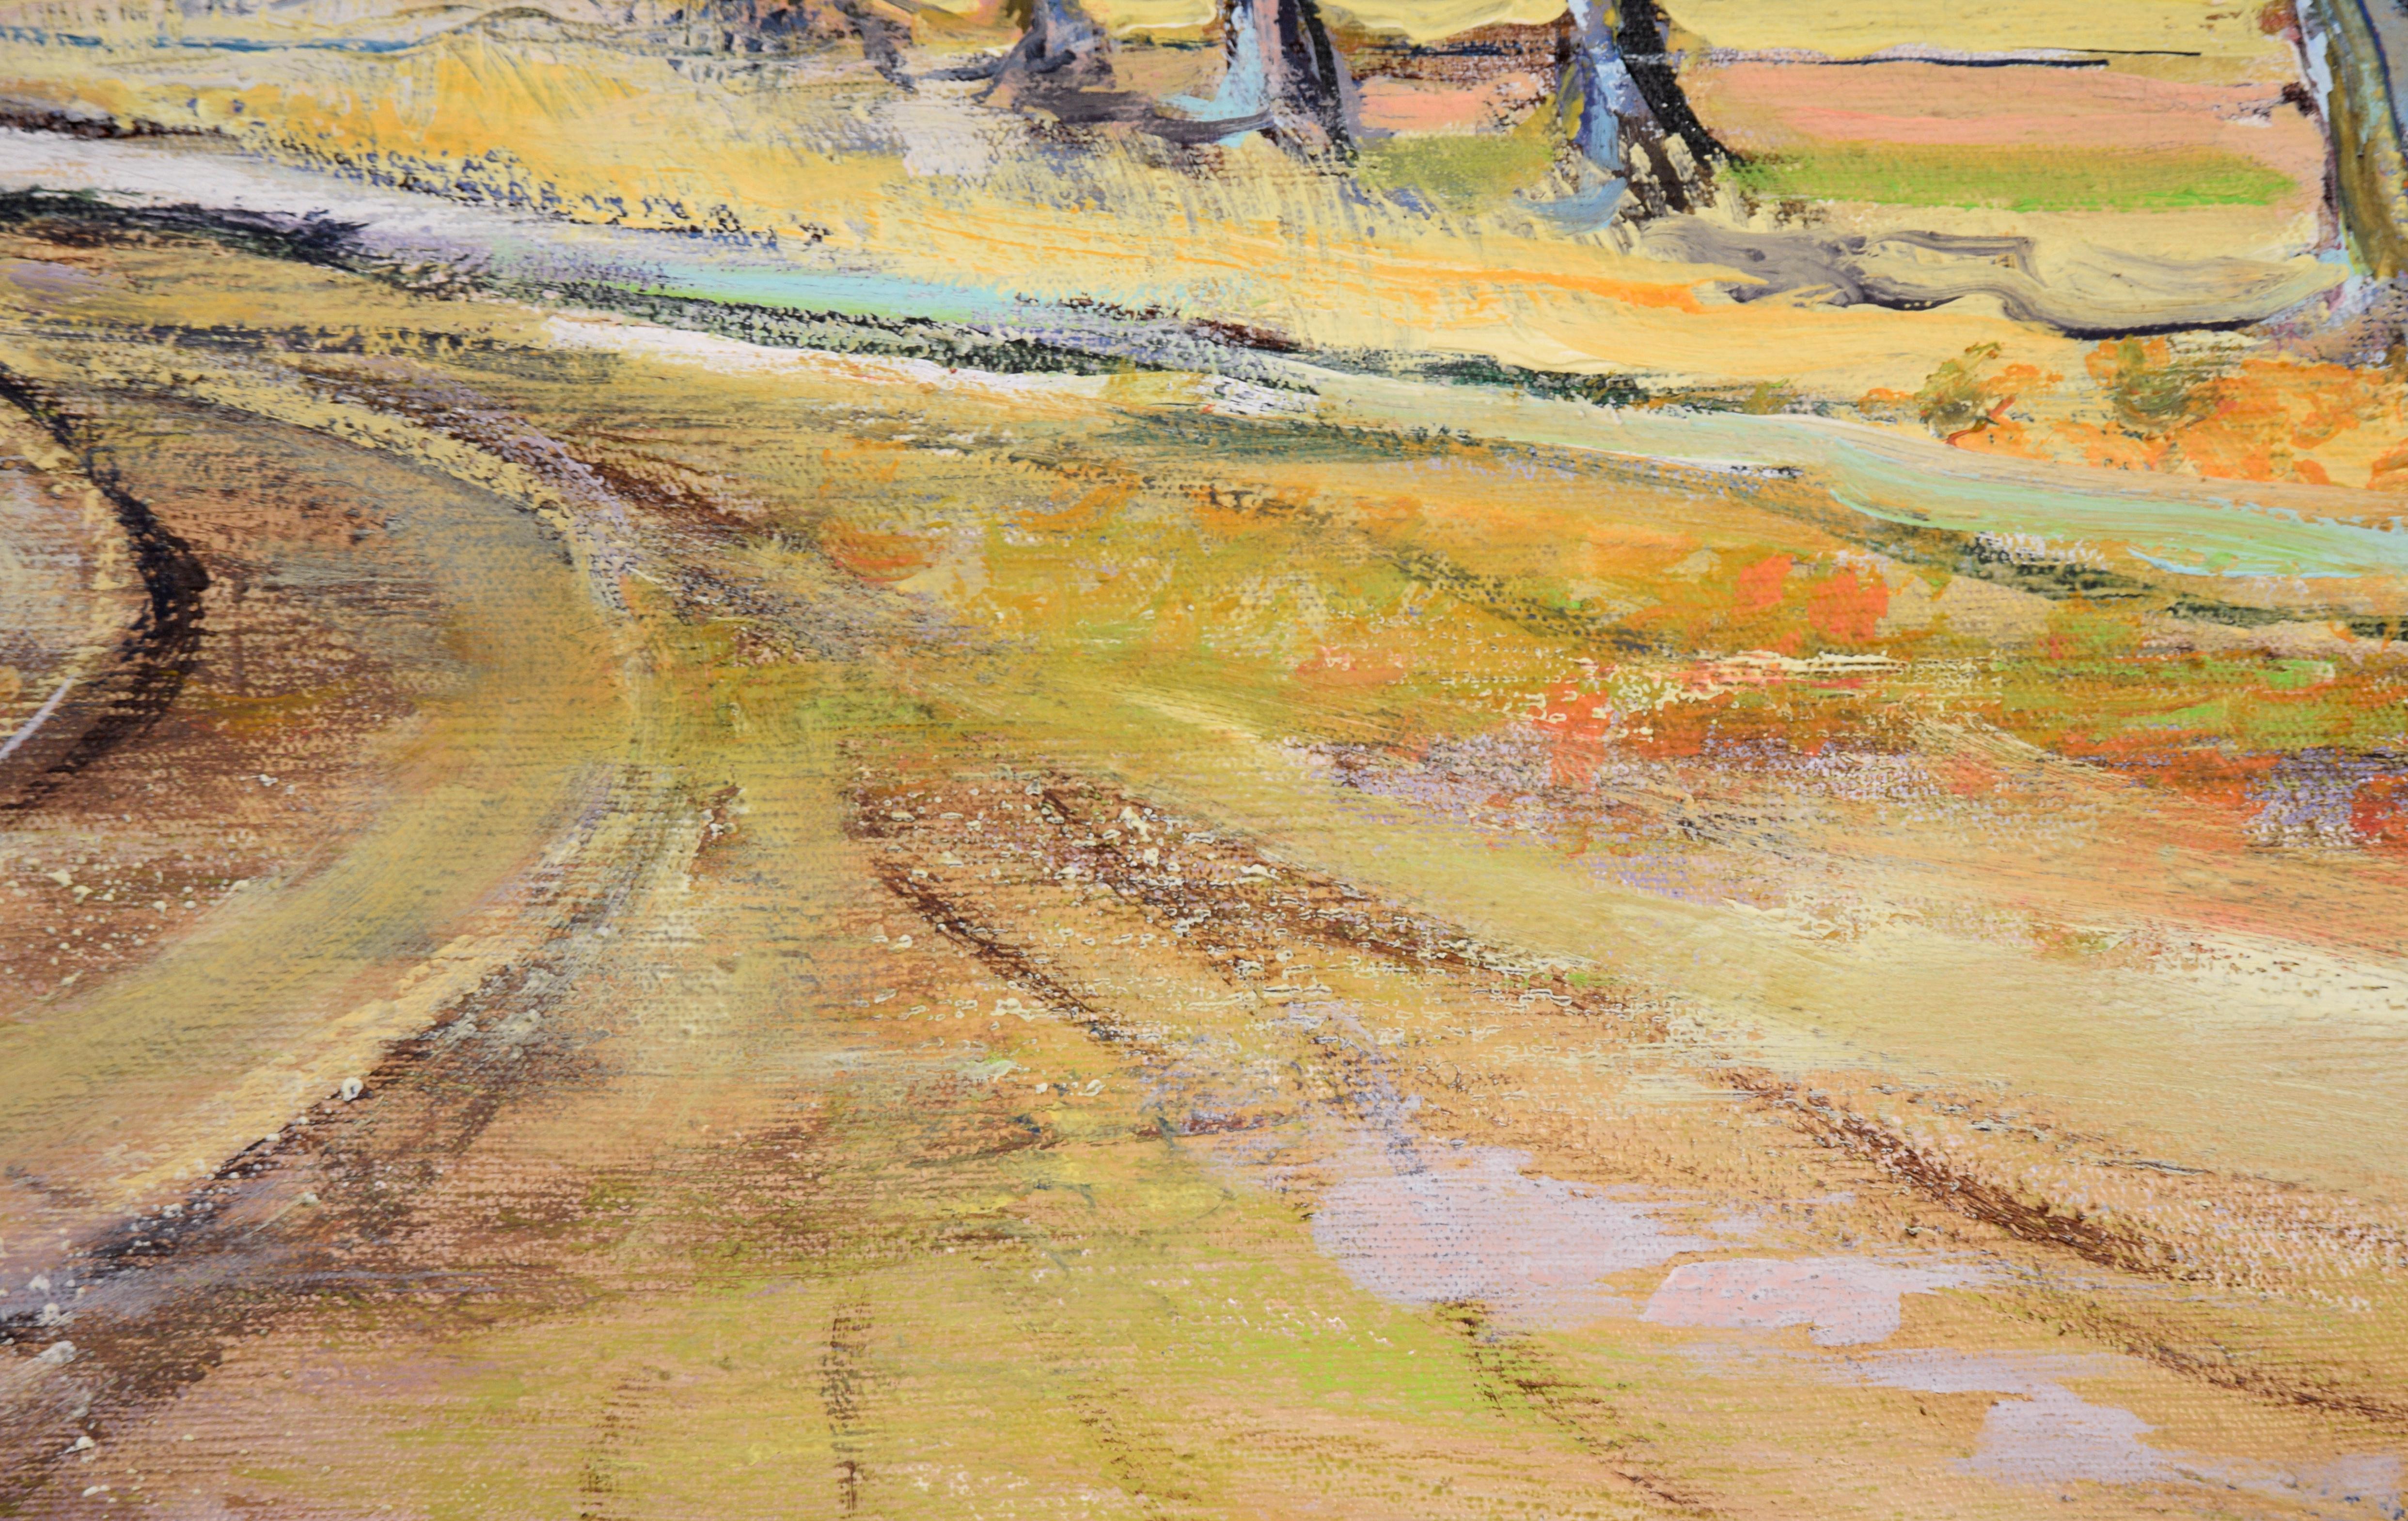 Landscape of a road approaching a farmhouse by notable California artist Tom Olson (American, b. 1927). Signed and dated in the lower left corner. Presented in a wood frame with linen liner. Canvas size: 24